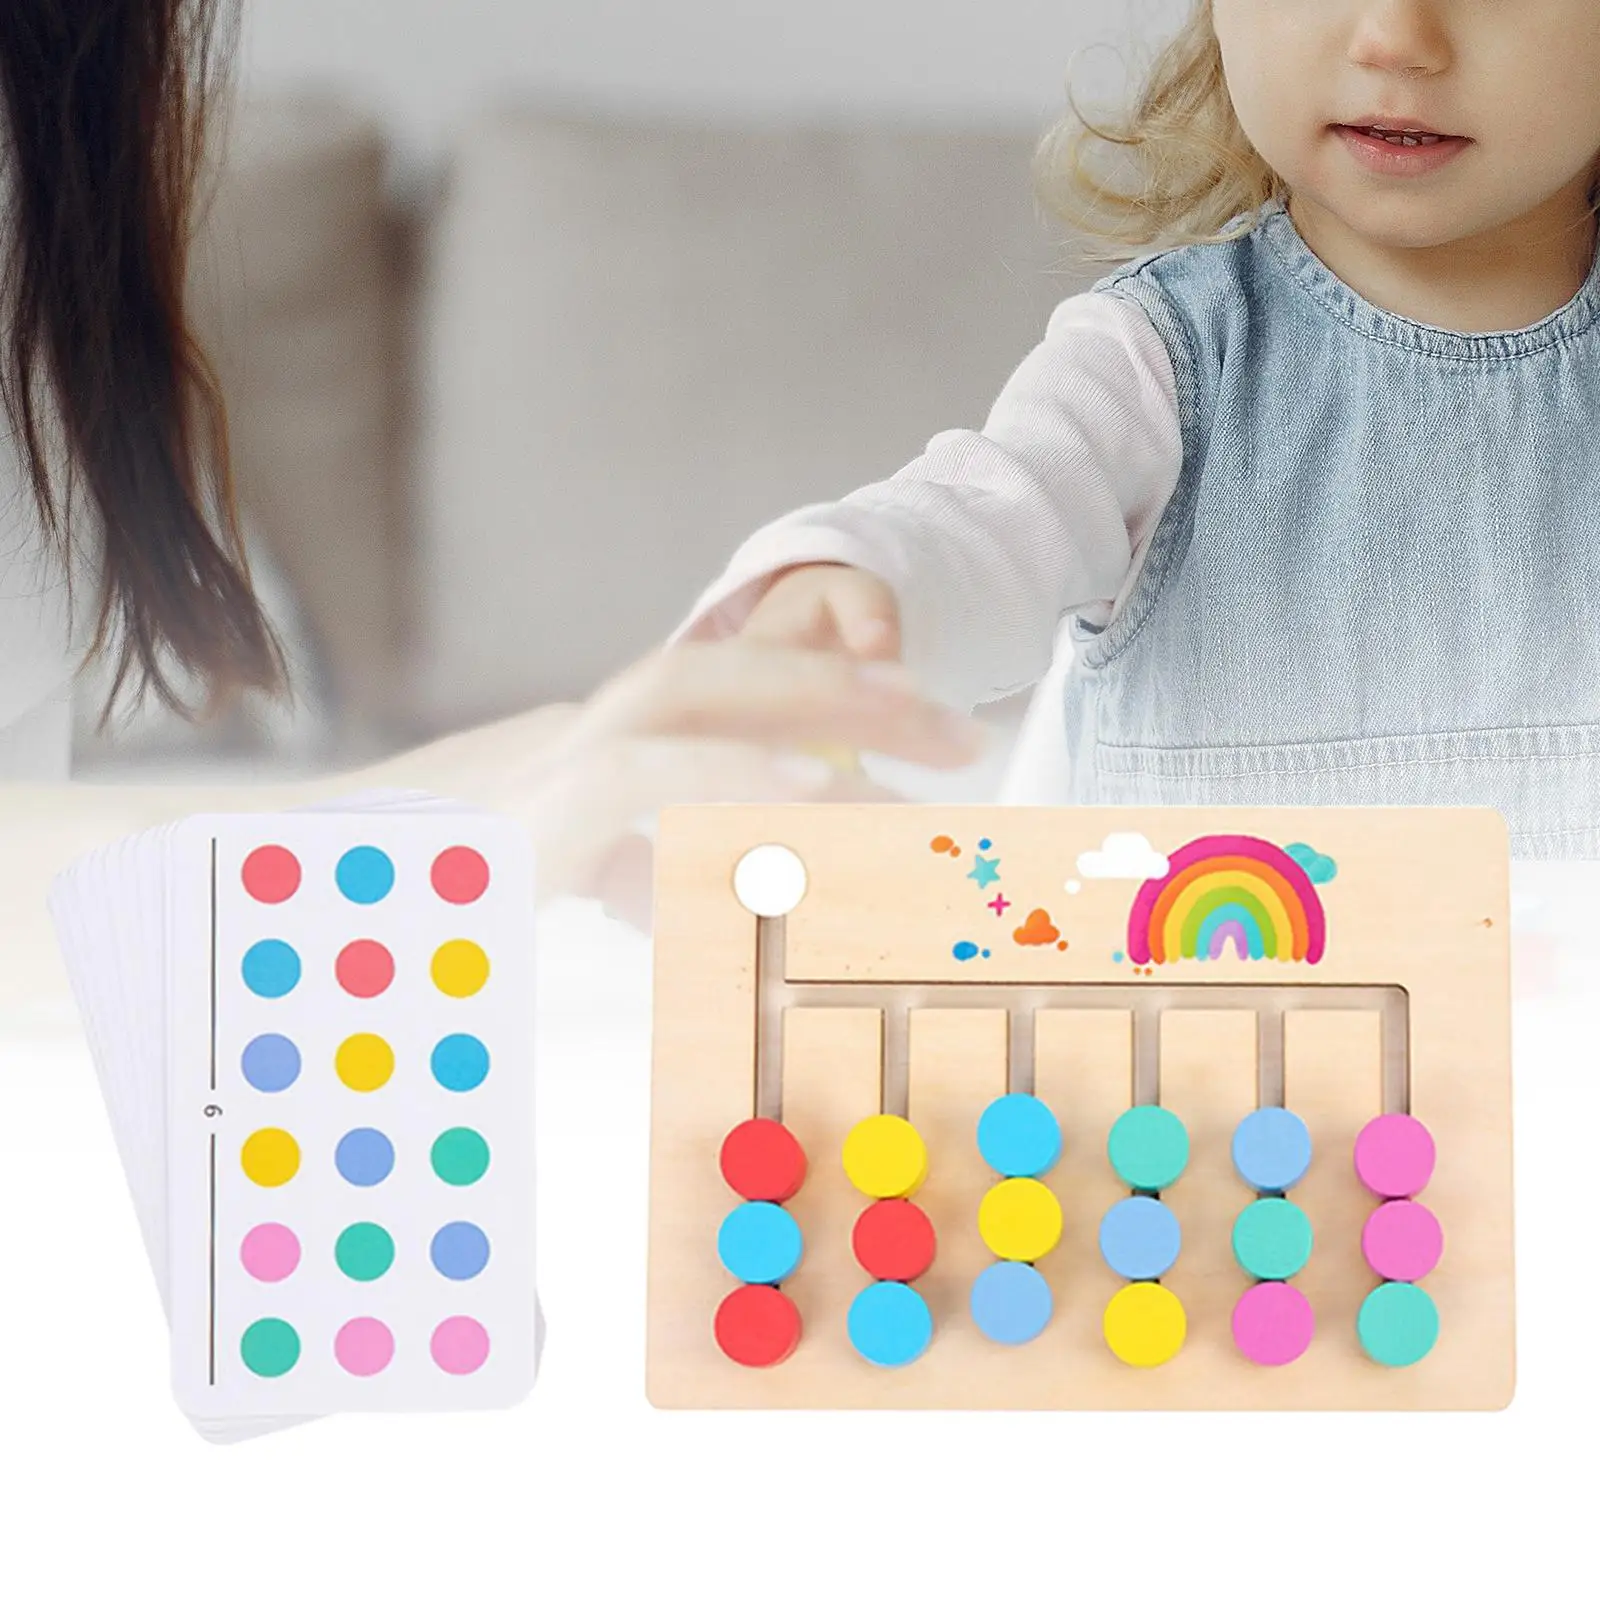 Montessori Toys Slide Puzzle Board Games Preschool Educational Toys Color and Shape Matching Brain Teasers Logic Game for Child